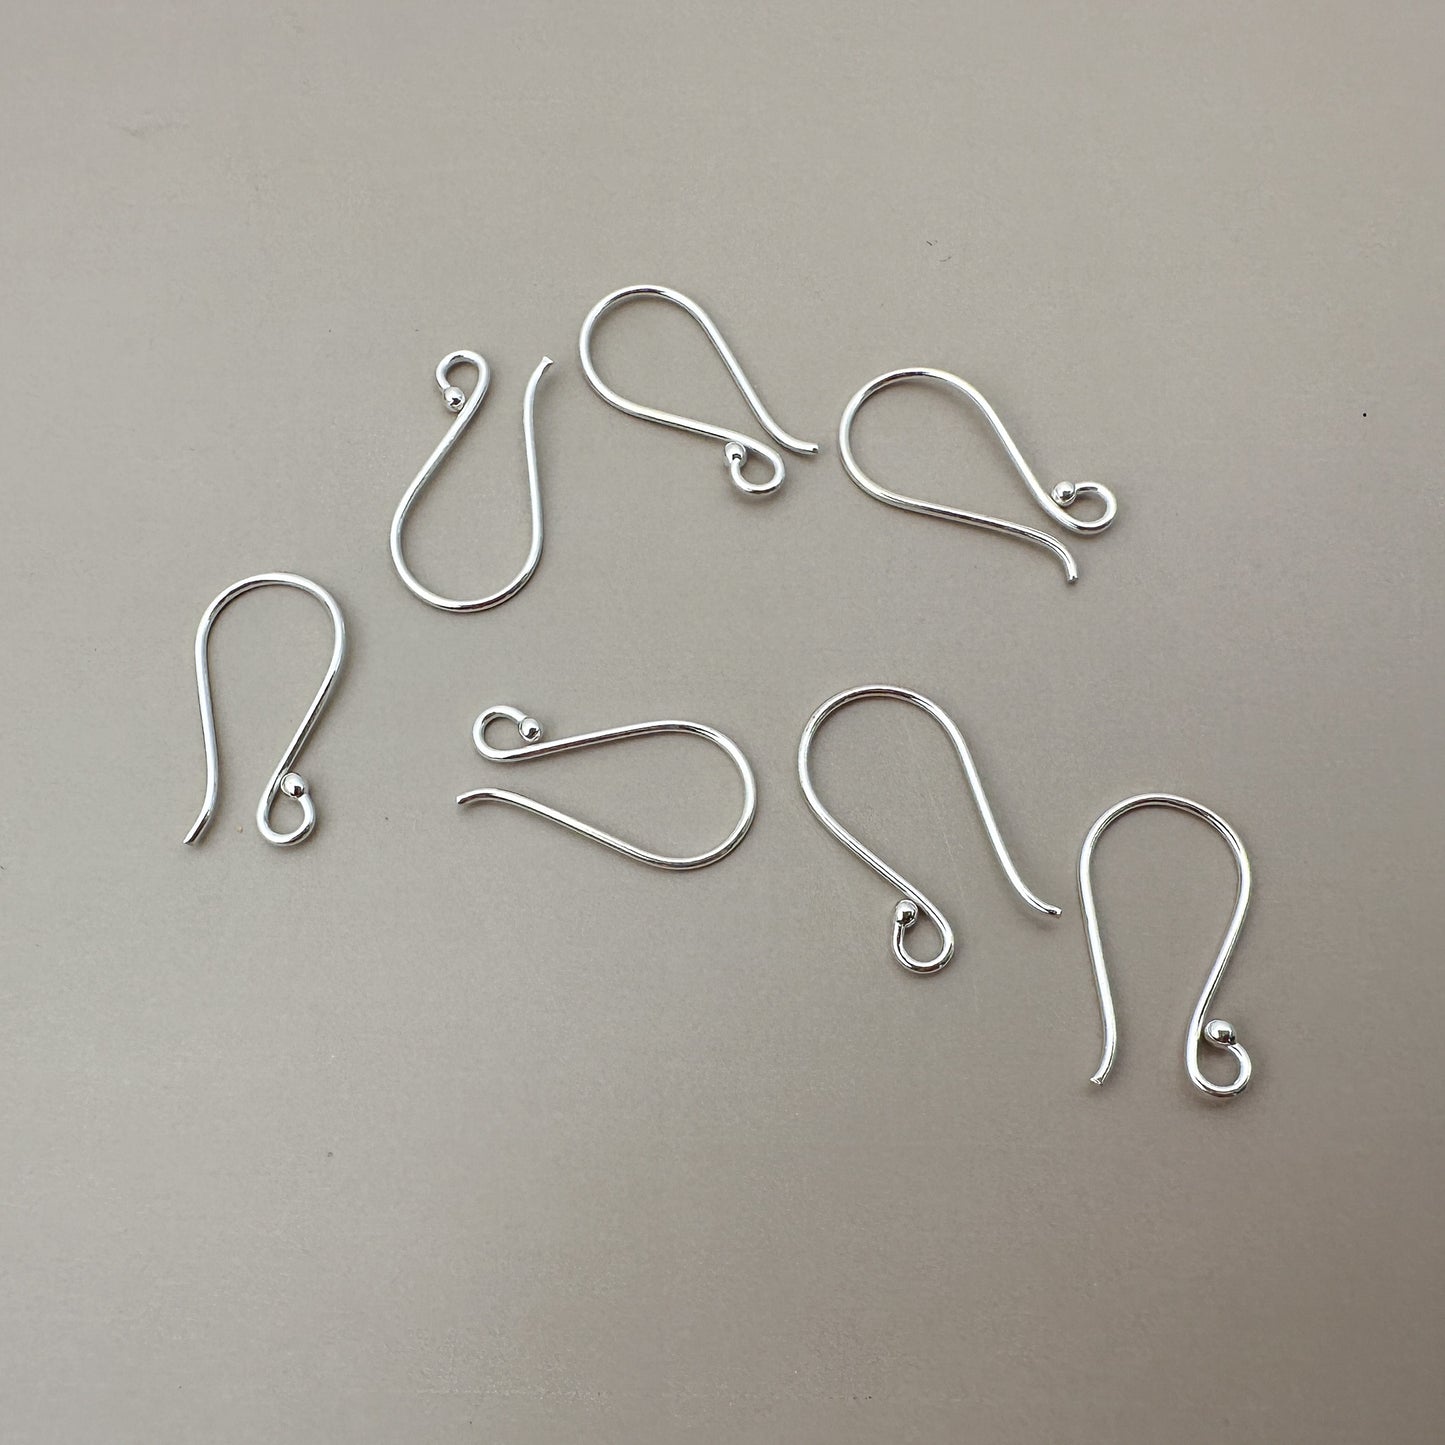 Shepherd Earwire with Ball (Sterling Silver) - 1 pair (S686)